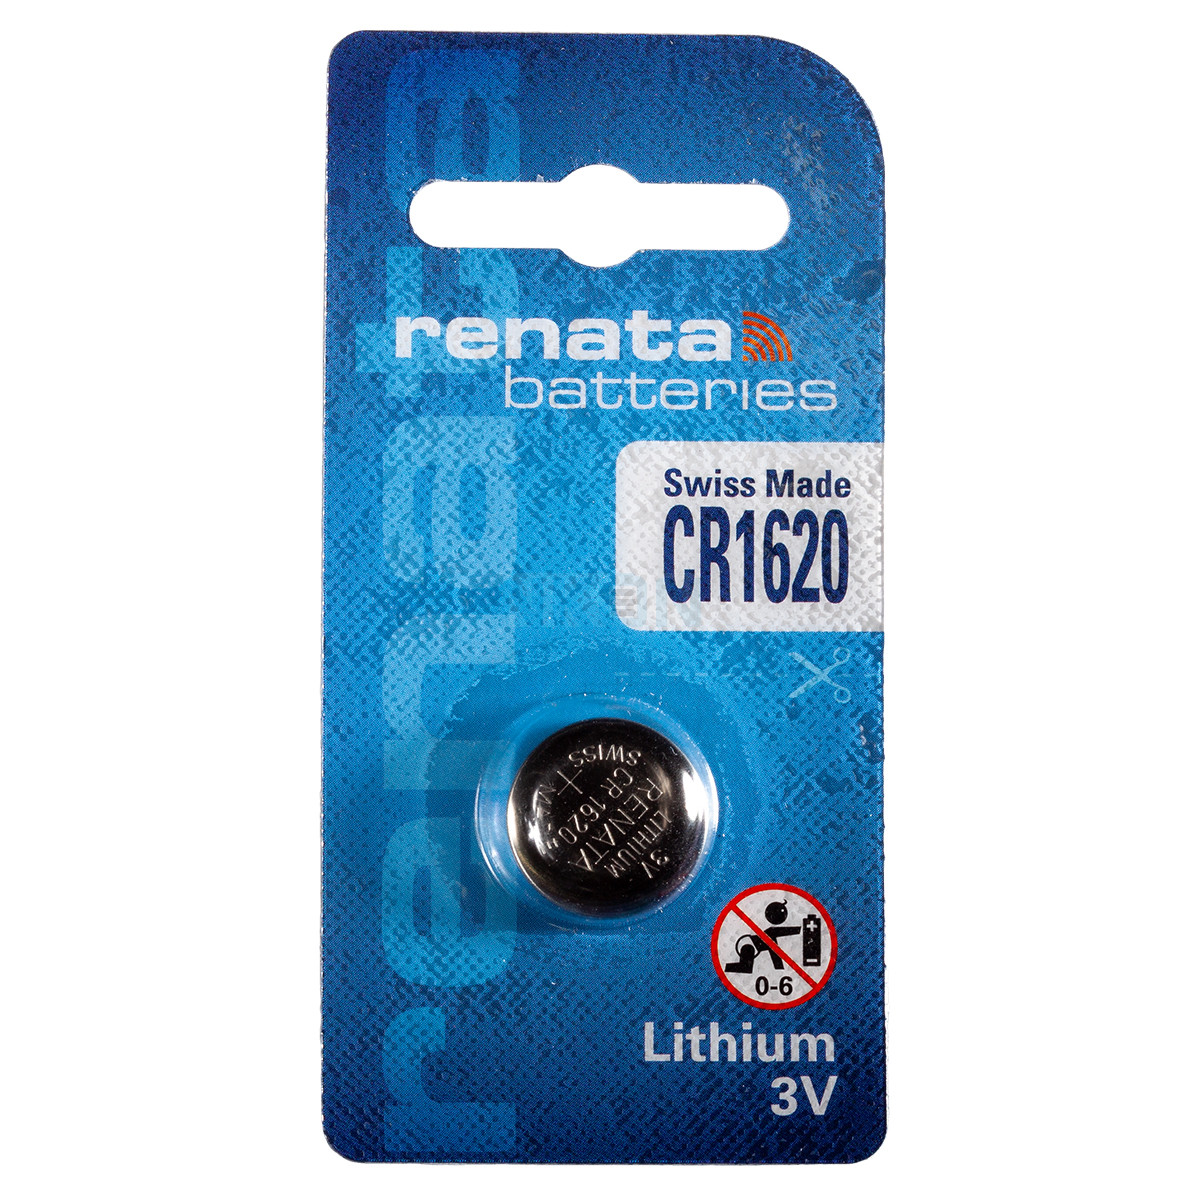 2pc/lot renata 100% Original CR1620 Button Cell Battery For Watch Car  Remote Key cr